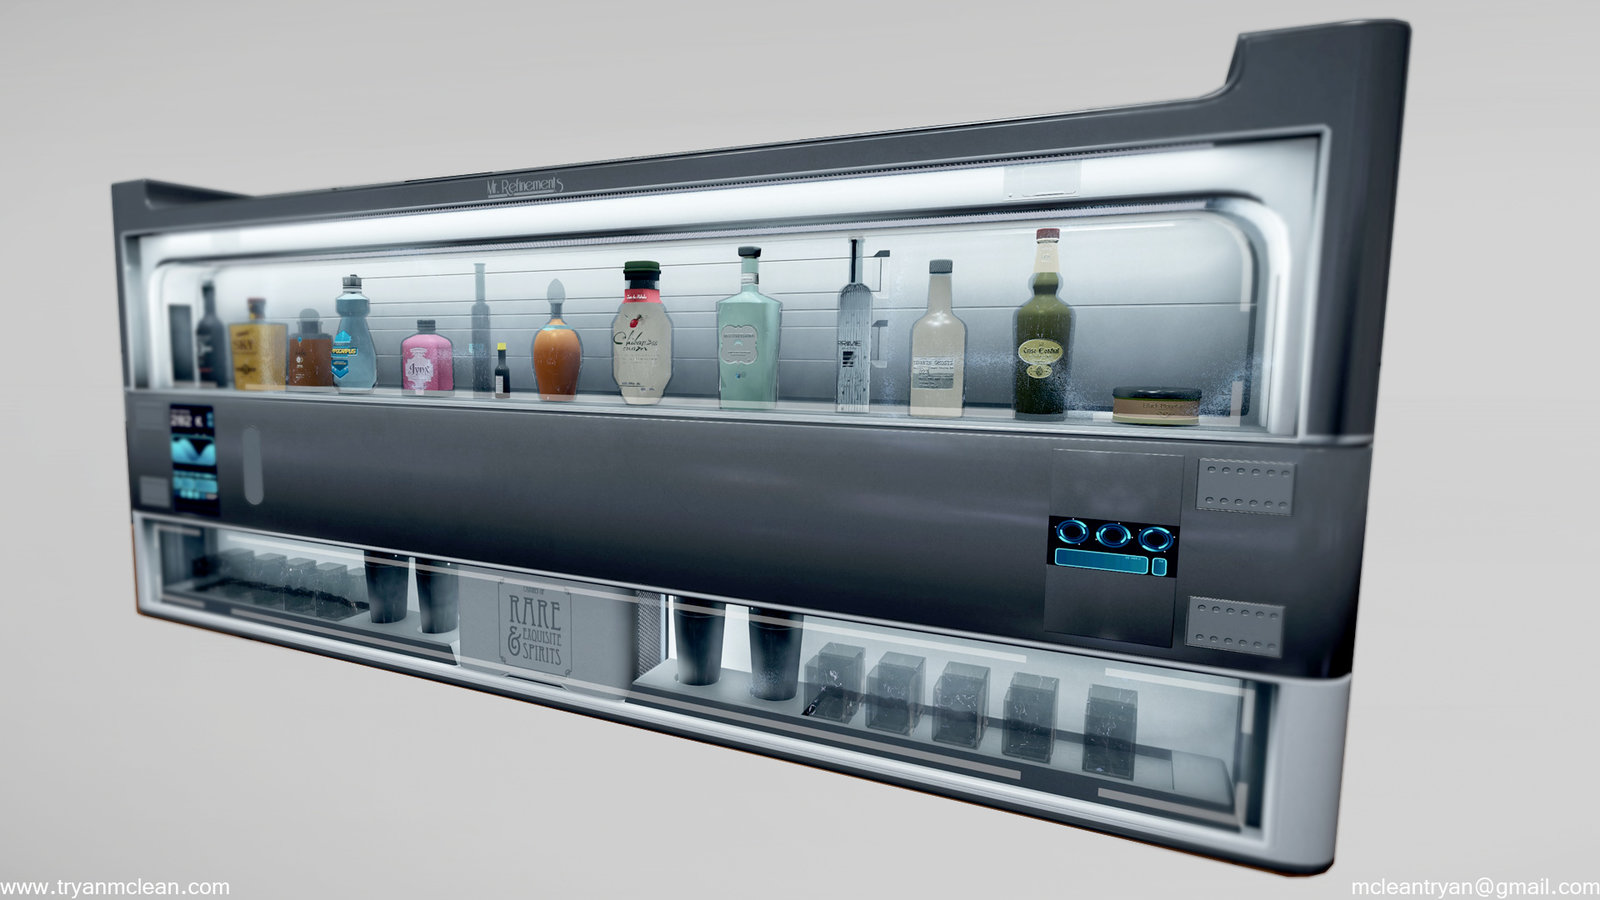 Star Citizen Subscriber Flair Liquor Cabinet. Modelling by myself. VFX and Liquor logos done by others on team. 